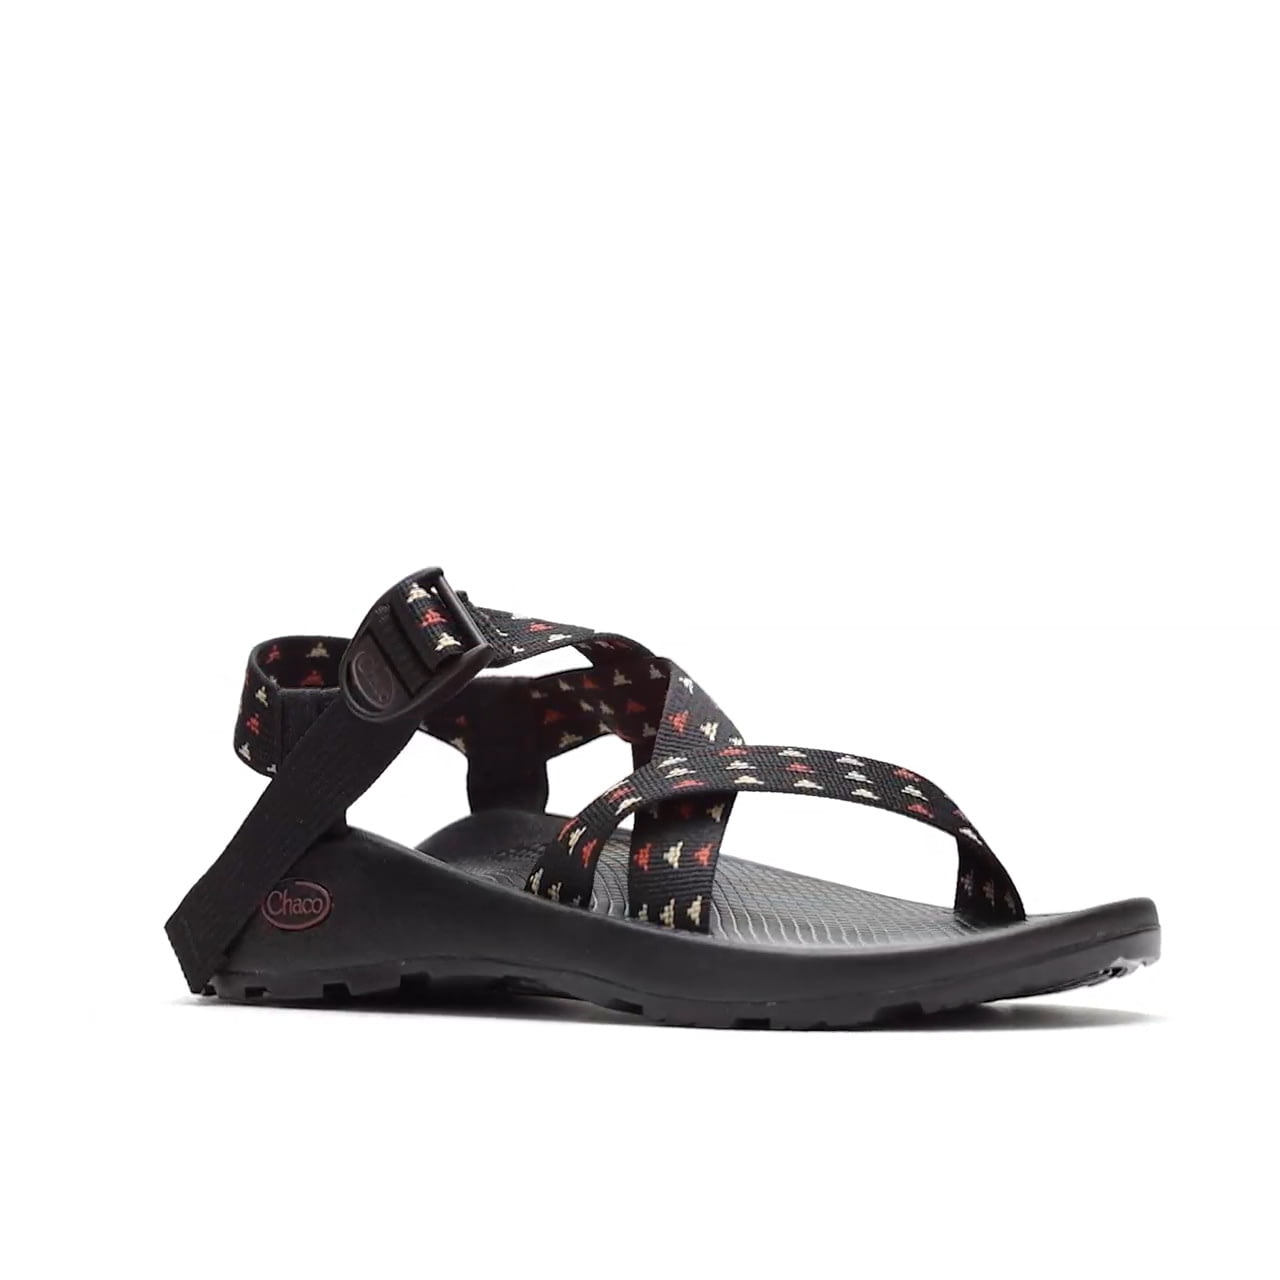 opplanet chaco z1 classic mens sandals 360 view video